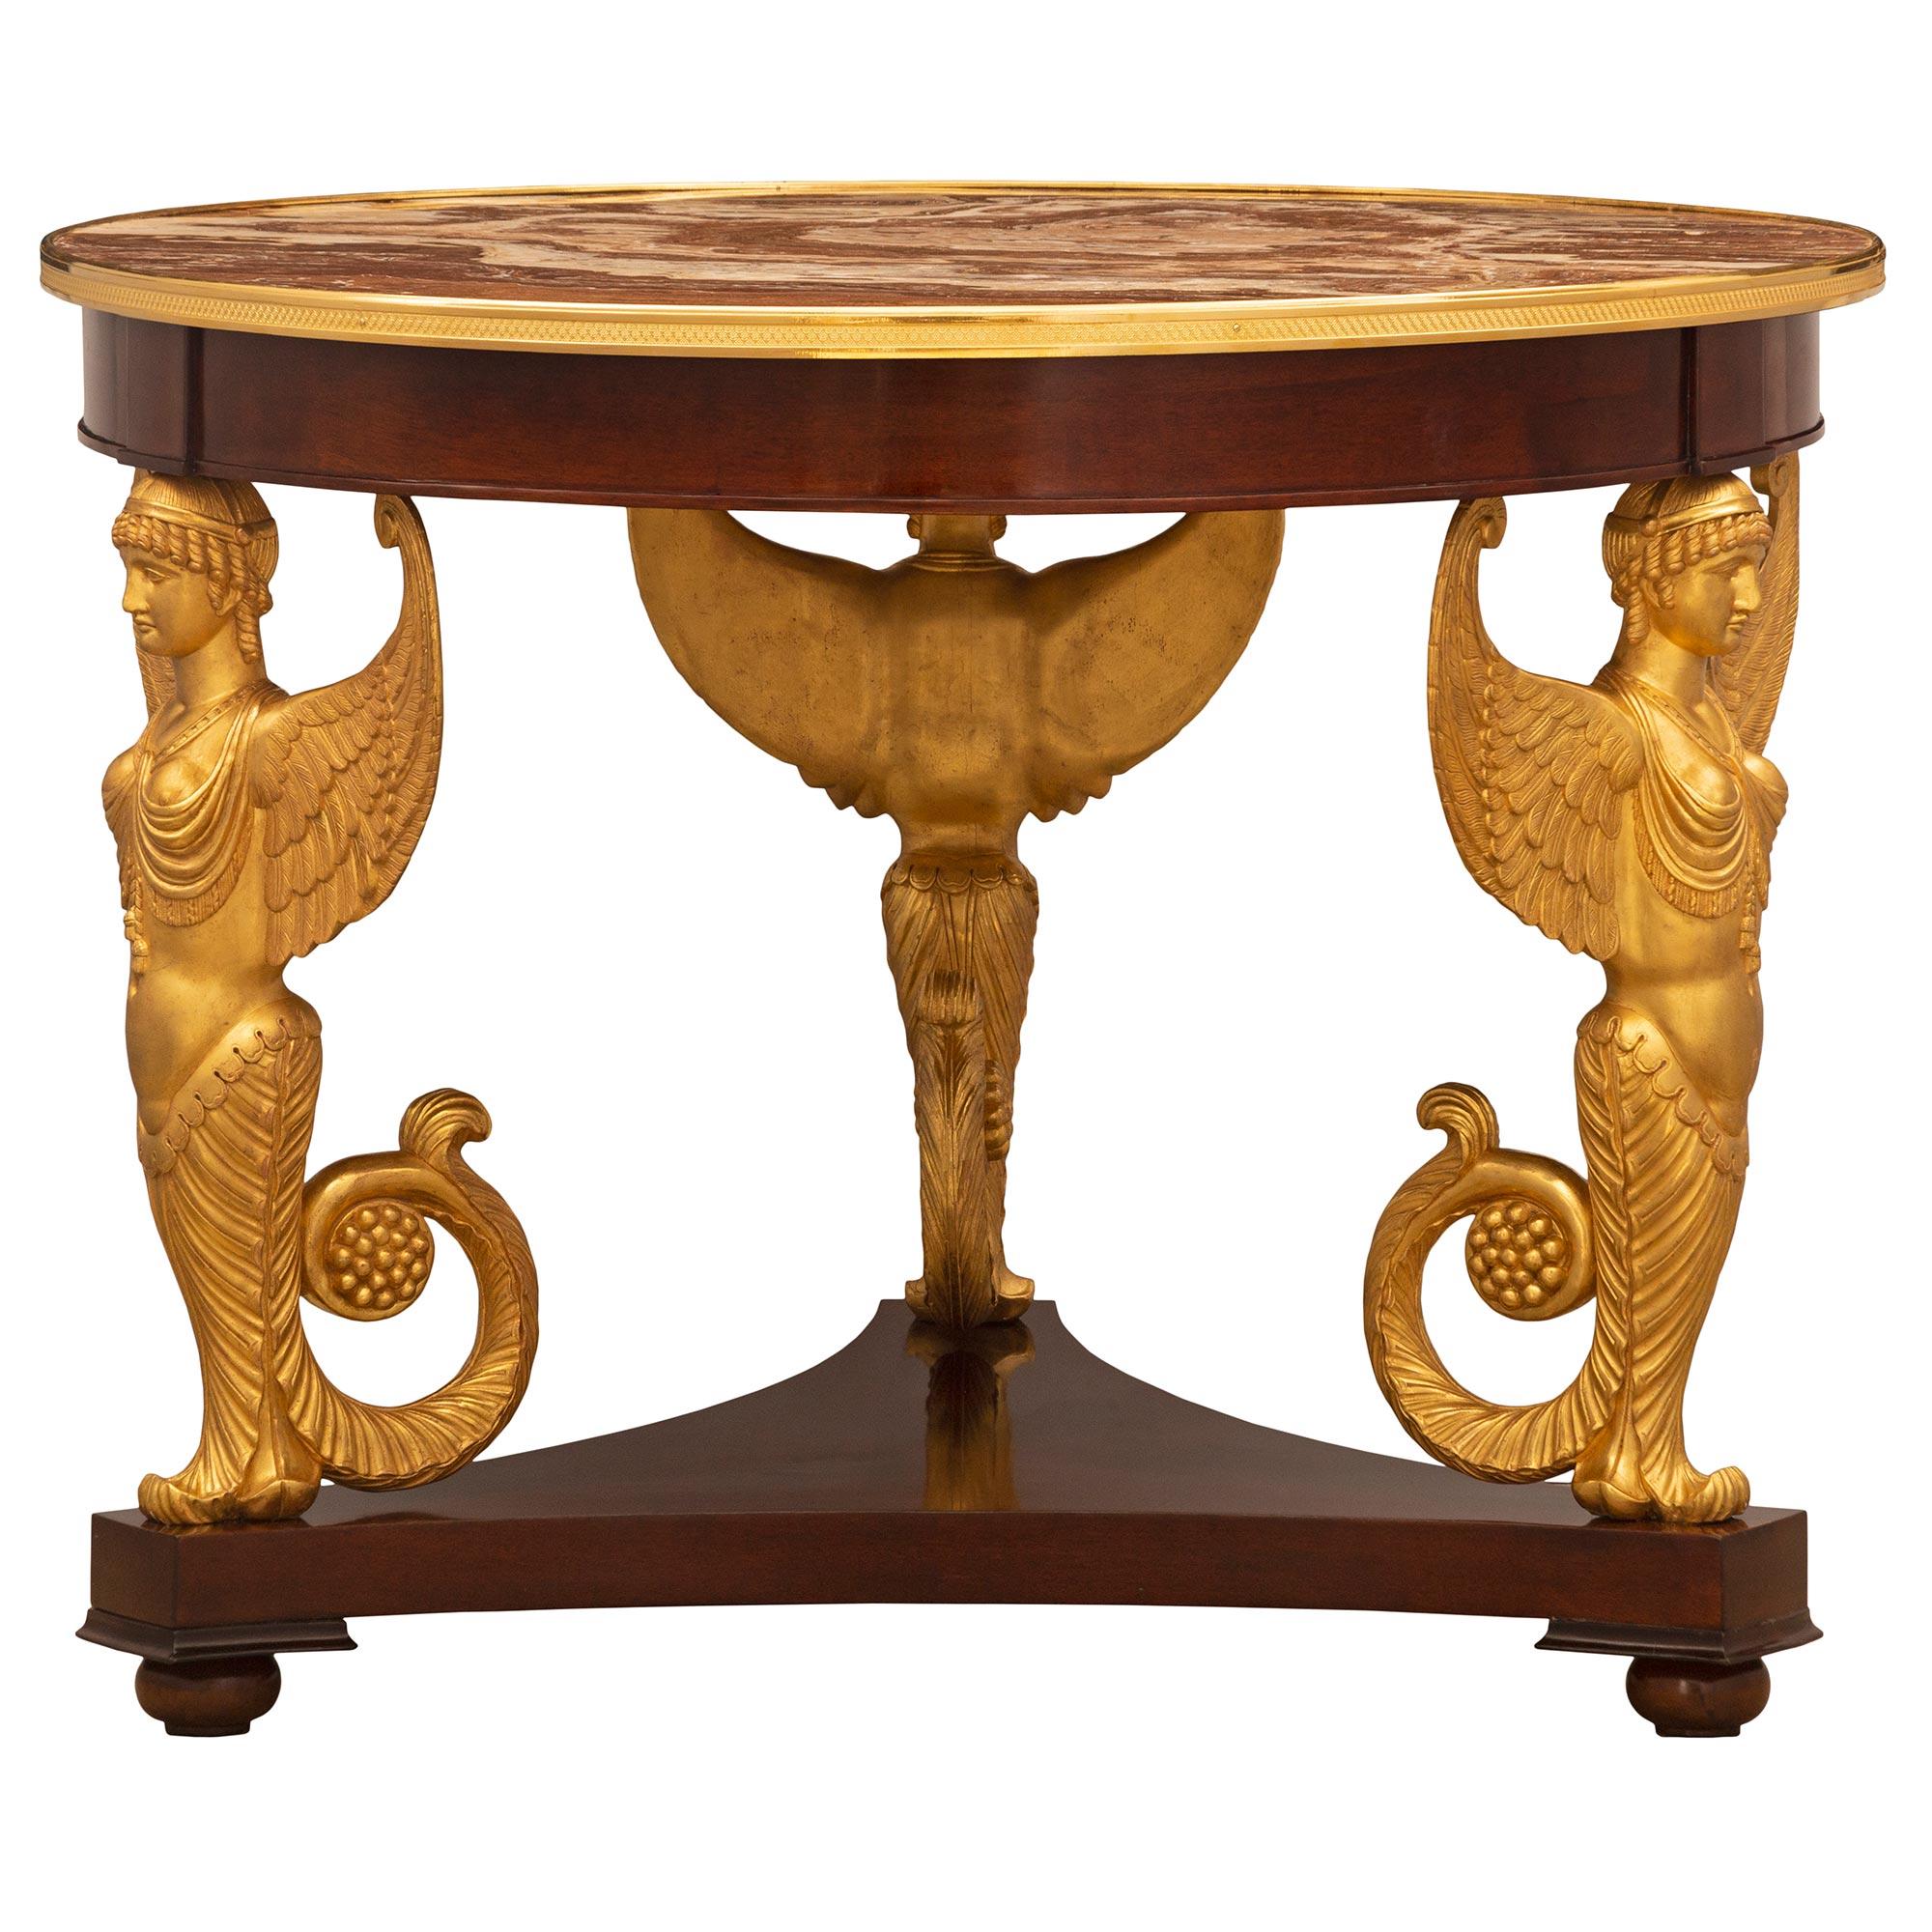 French 19th Century Empire St. Mahogany, Giltwood, Ormolu And Marble Table For Sale 1